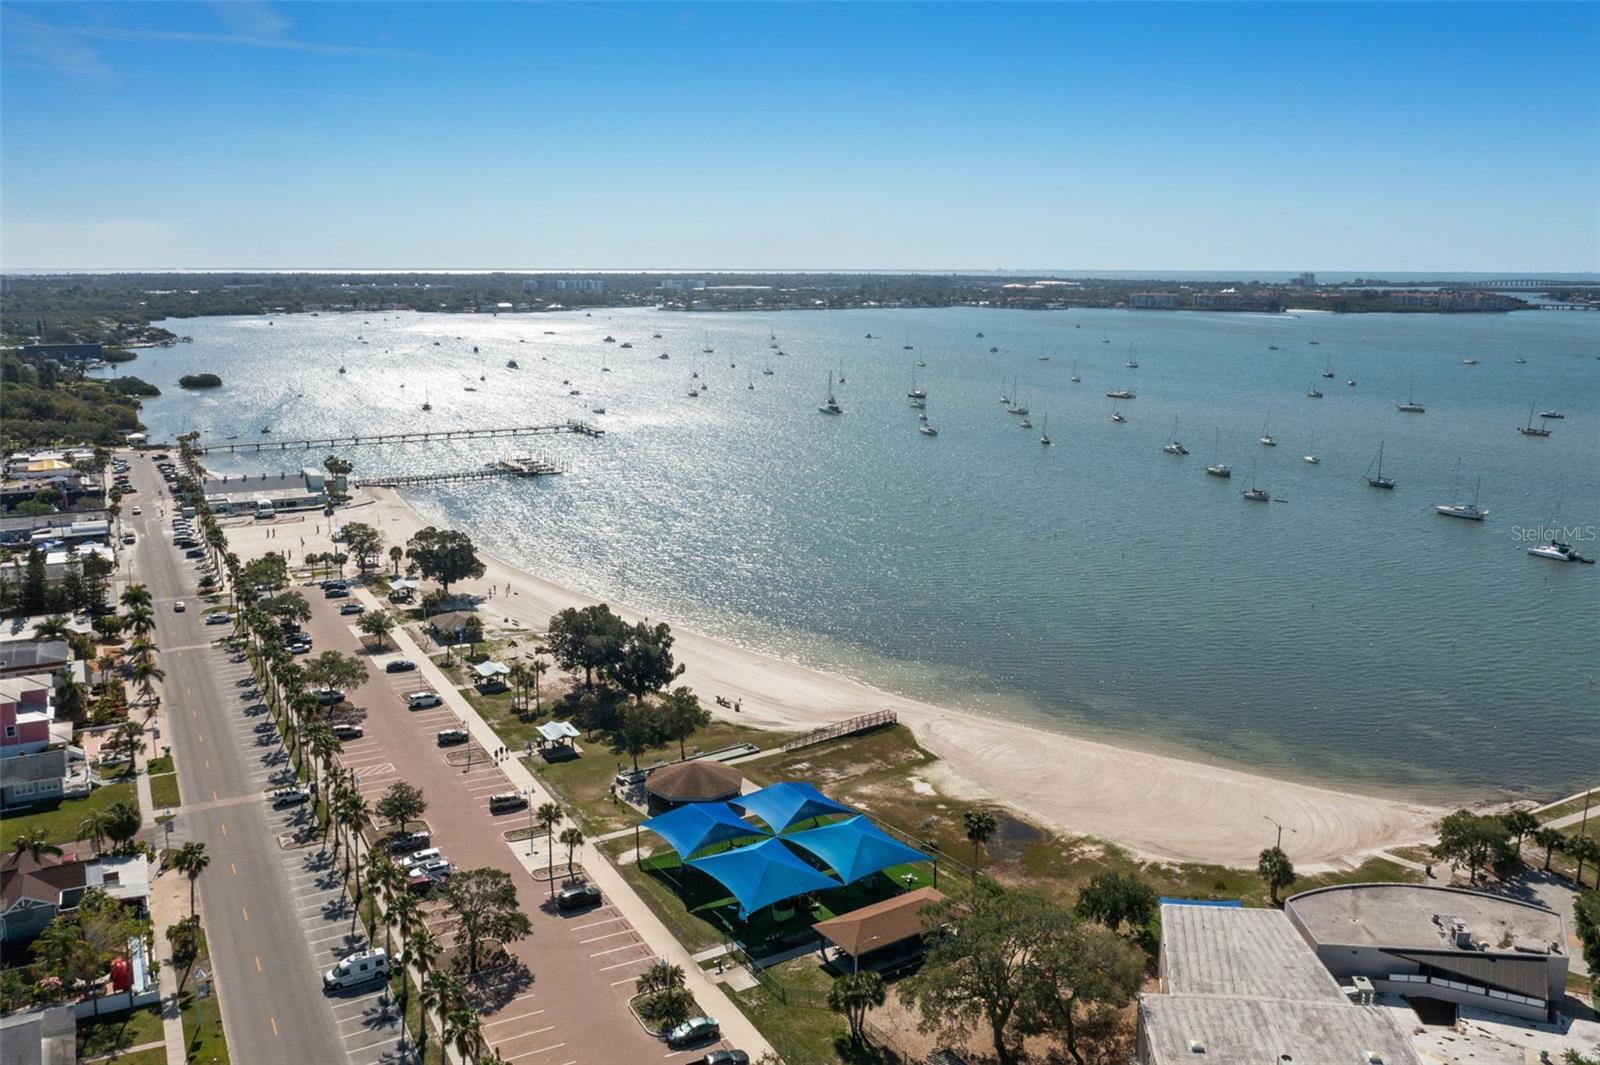 Gulfport beach access, sand volleyball courts, casino, and pier are just a short walk away.